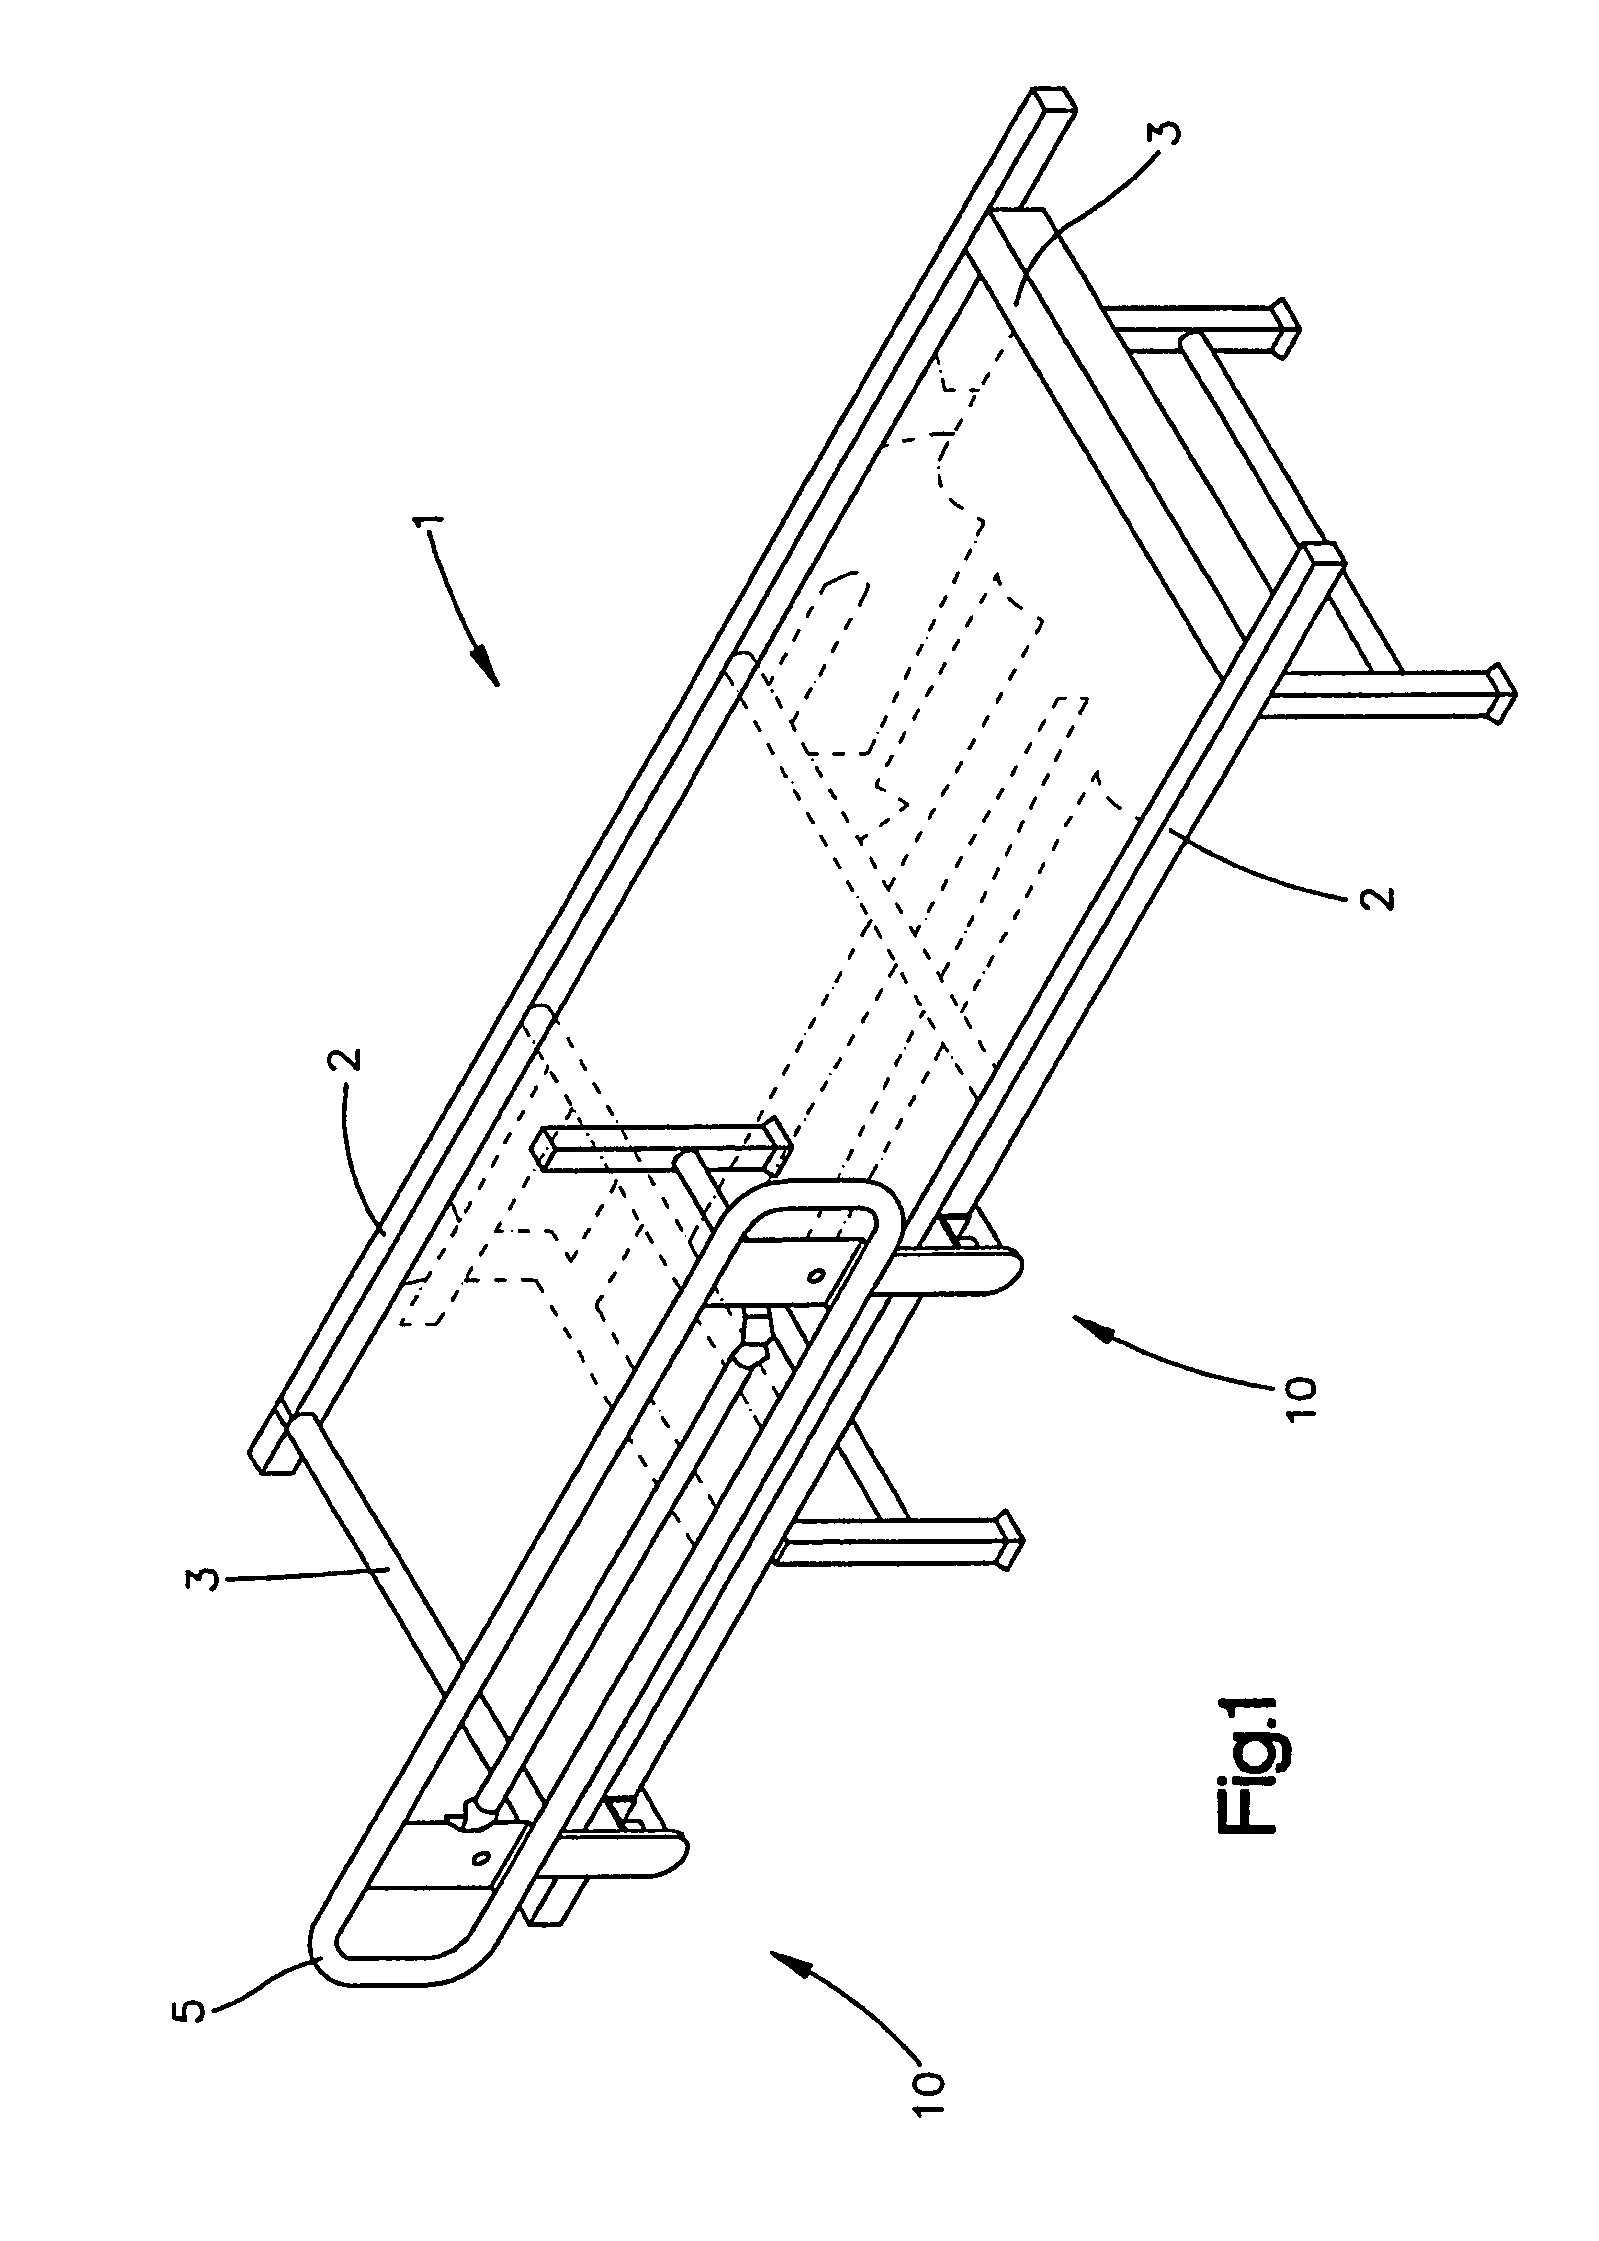 Bed with anti-rattle mechanism for a bed rail